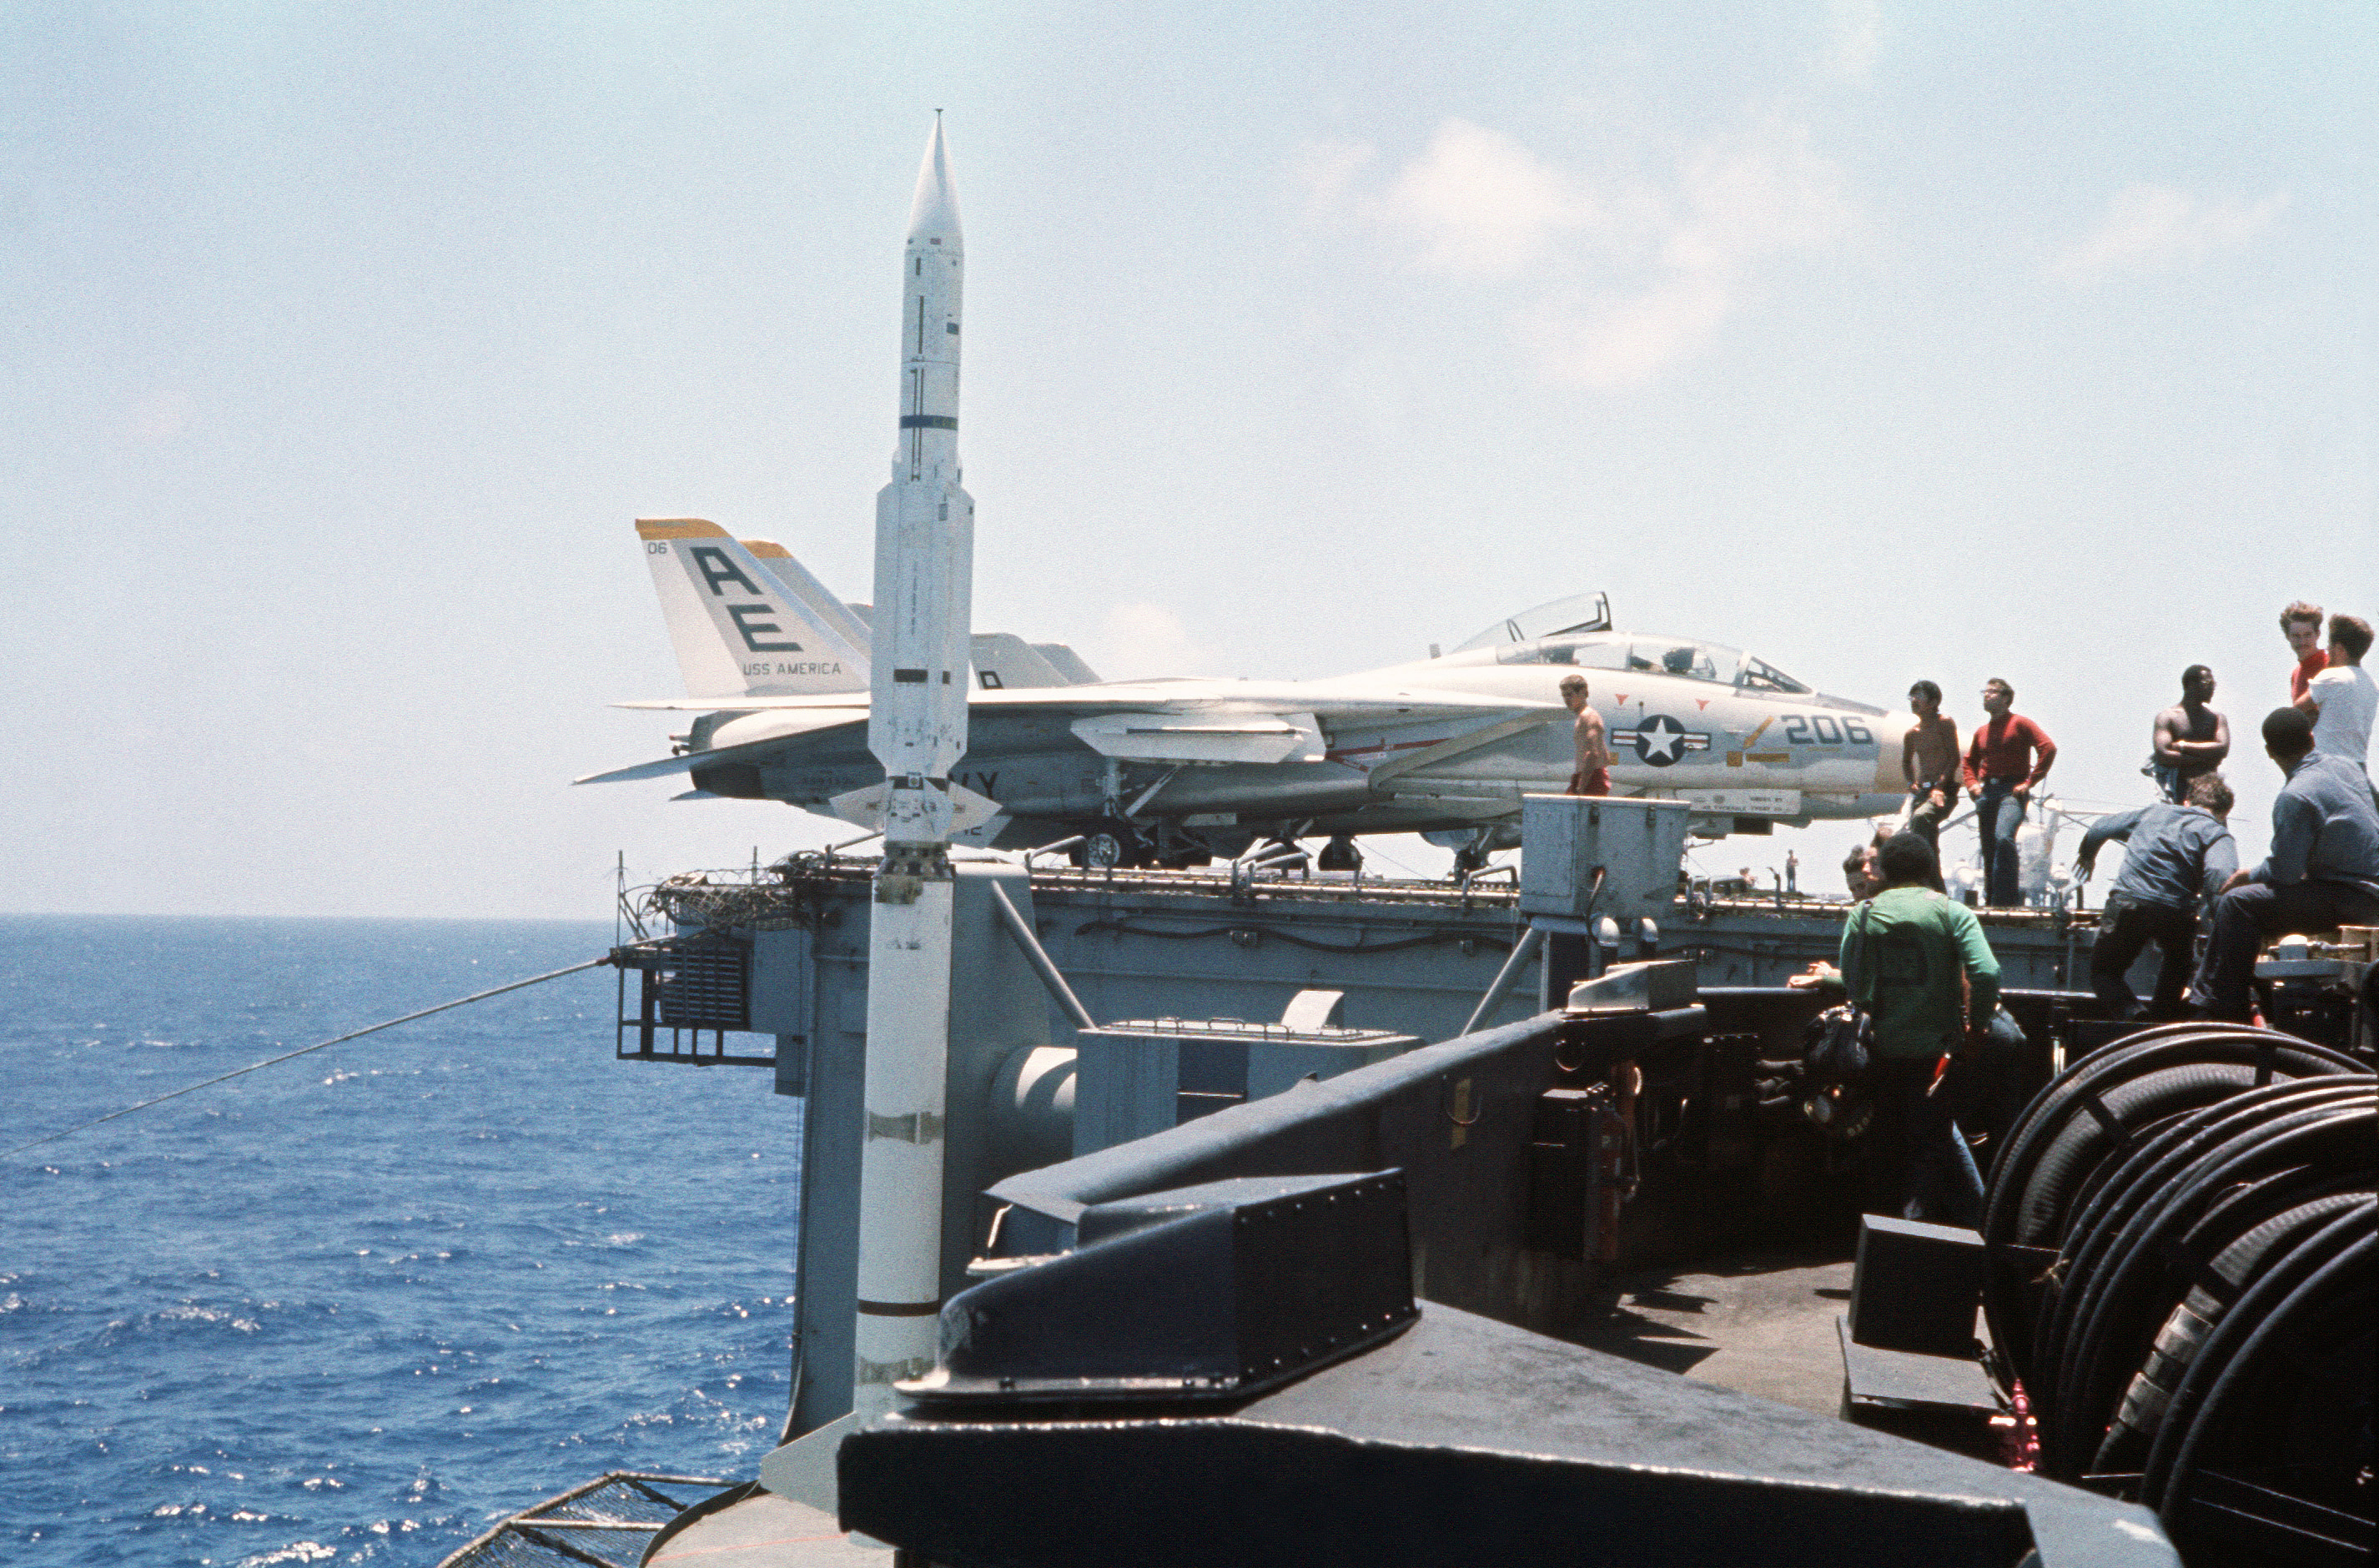 USS_America_with_standard_missile.jpg